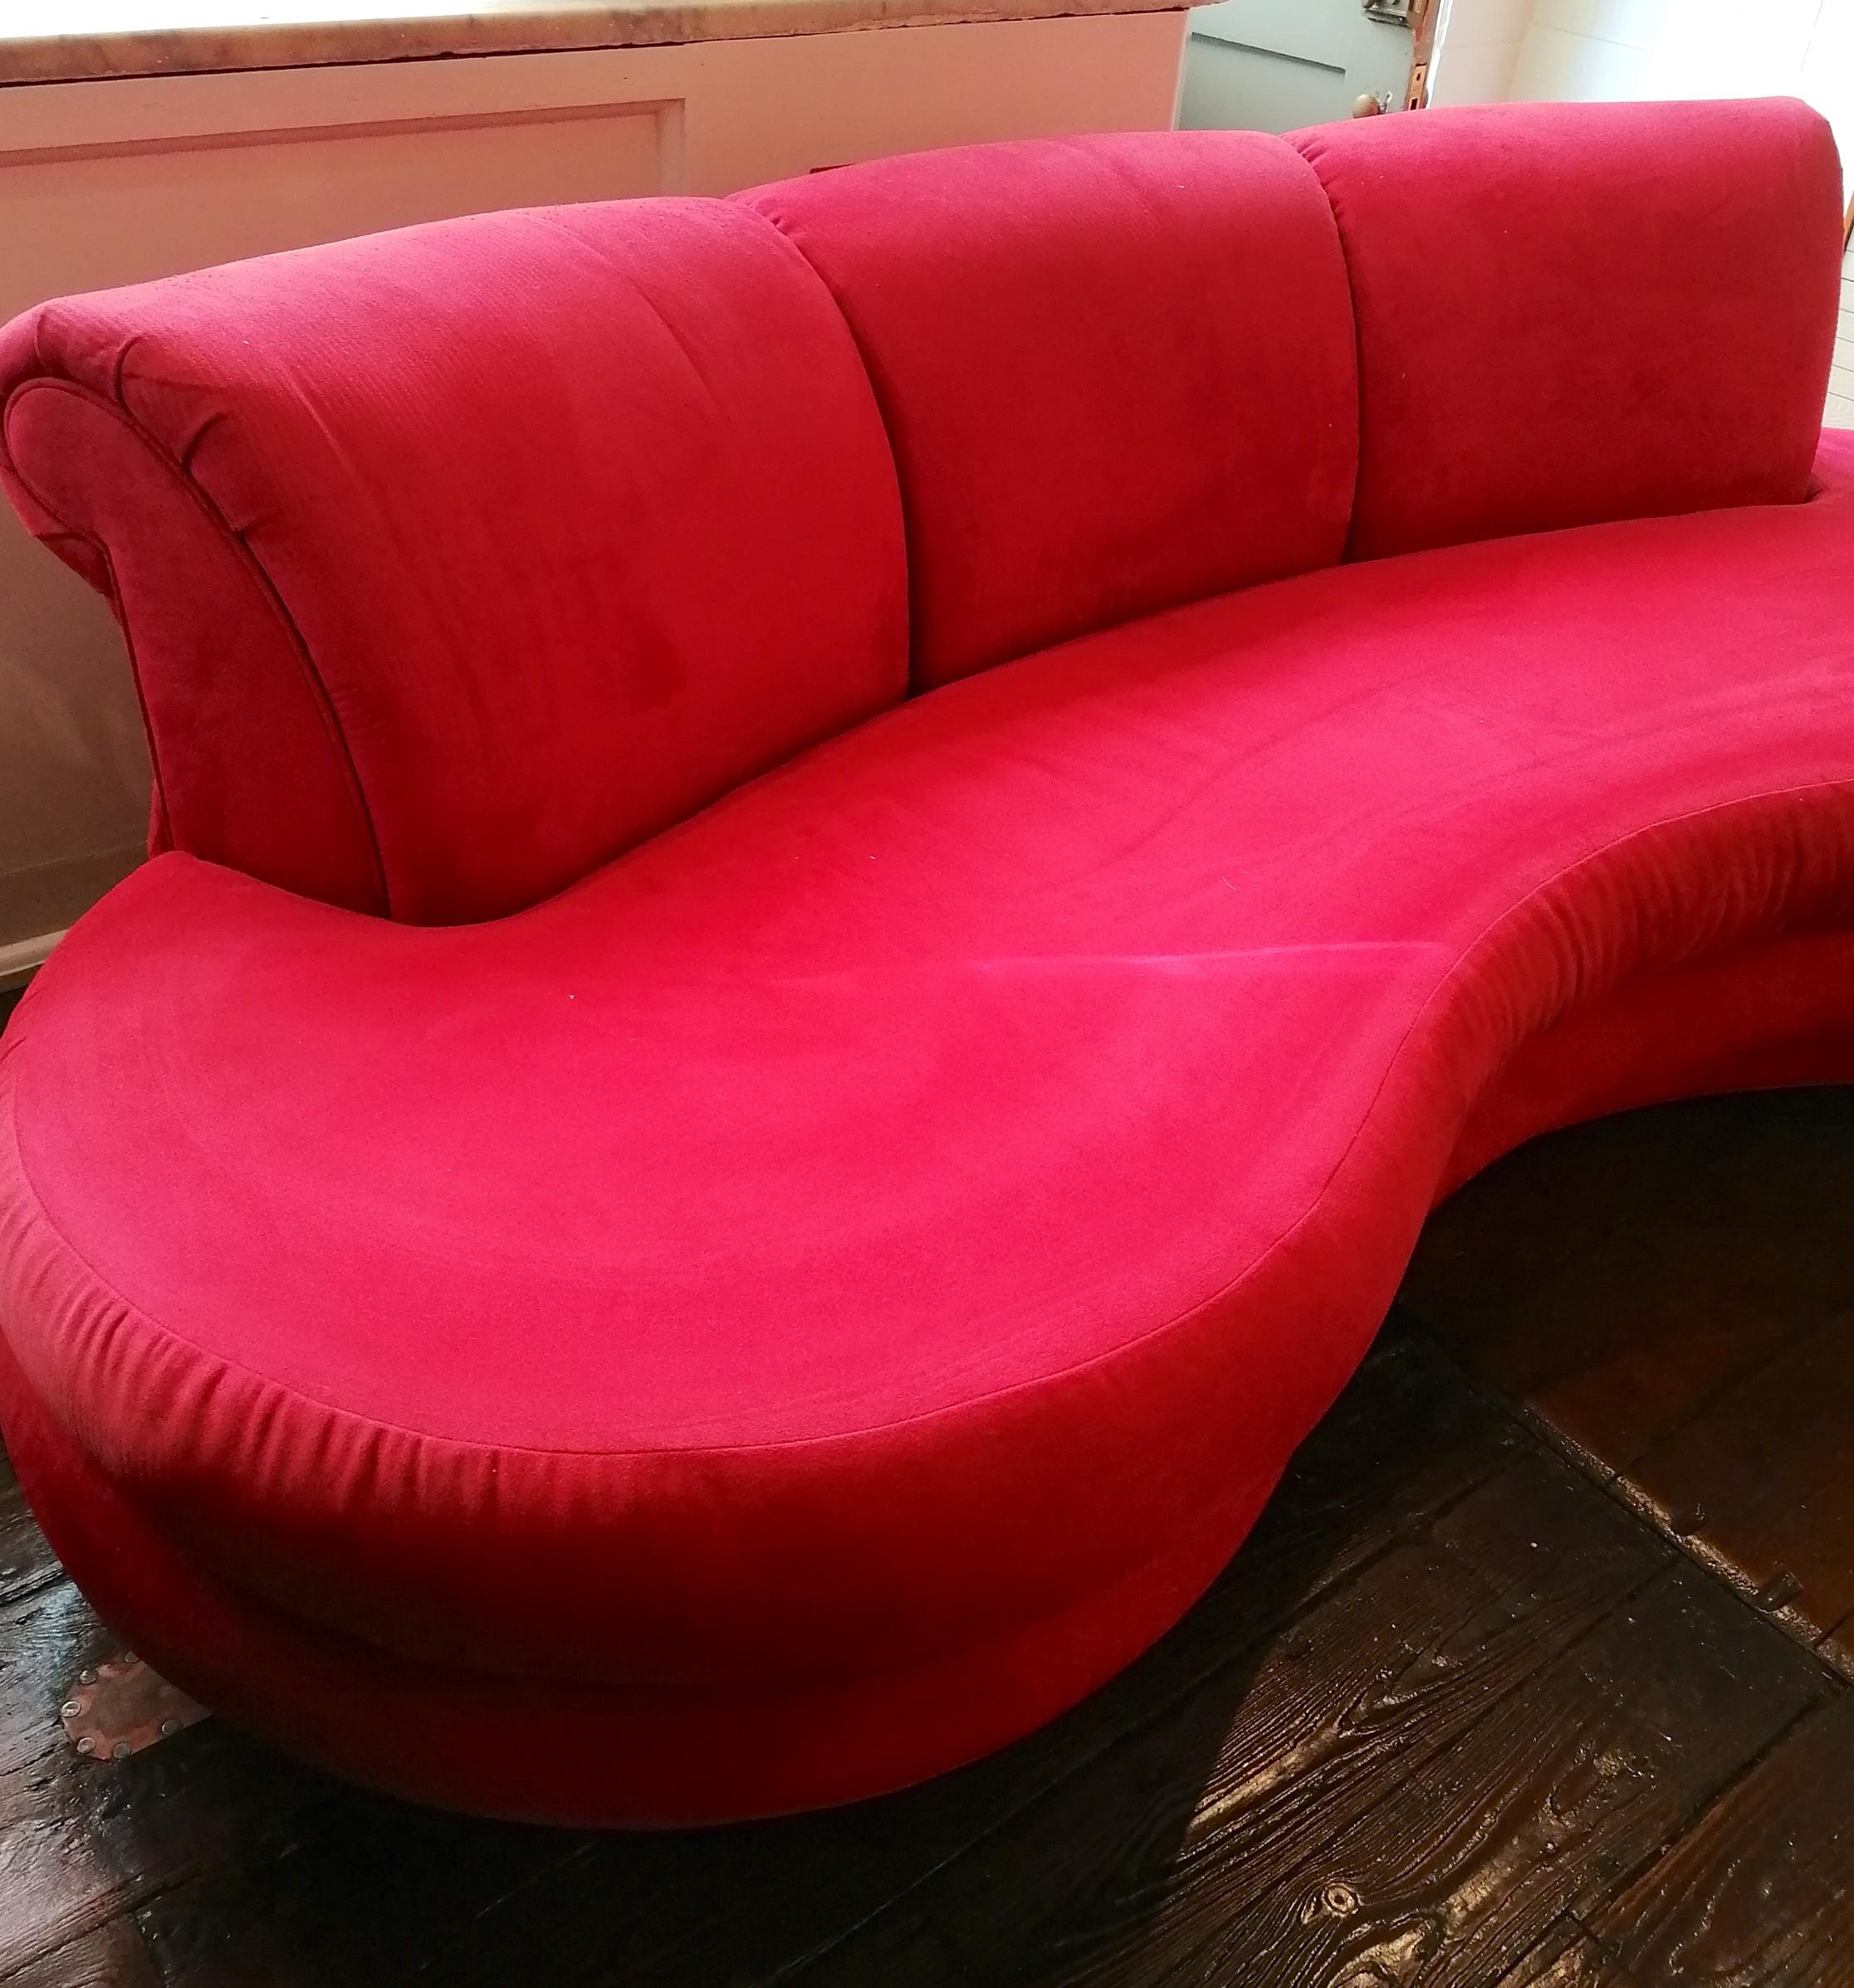 Ultrasuede Sculptural curved cloud sofa by Adrian Pearsall for Comfort Designs, USA 1980s. 